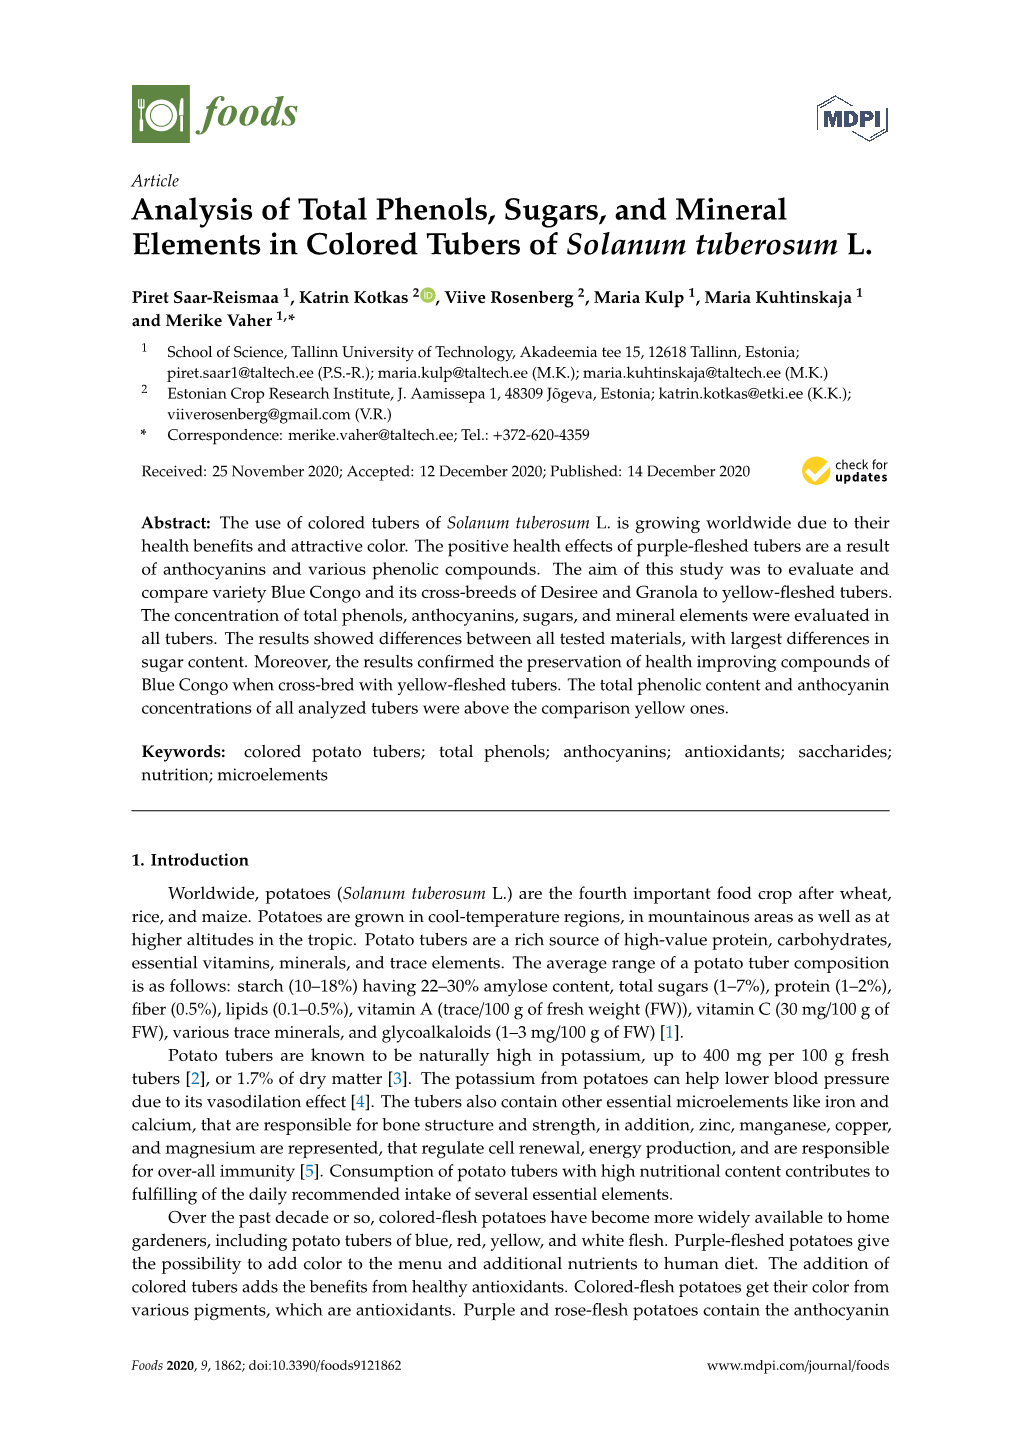 Analysis of Total Phenols, Sugars, and Mineral Elements in Colored Tubers of Solanum Tuberosum L